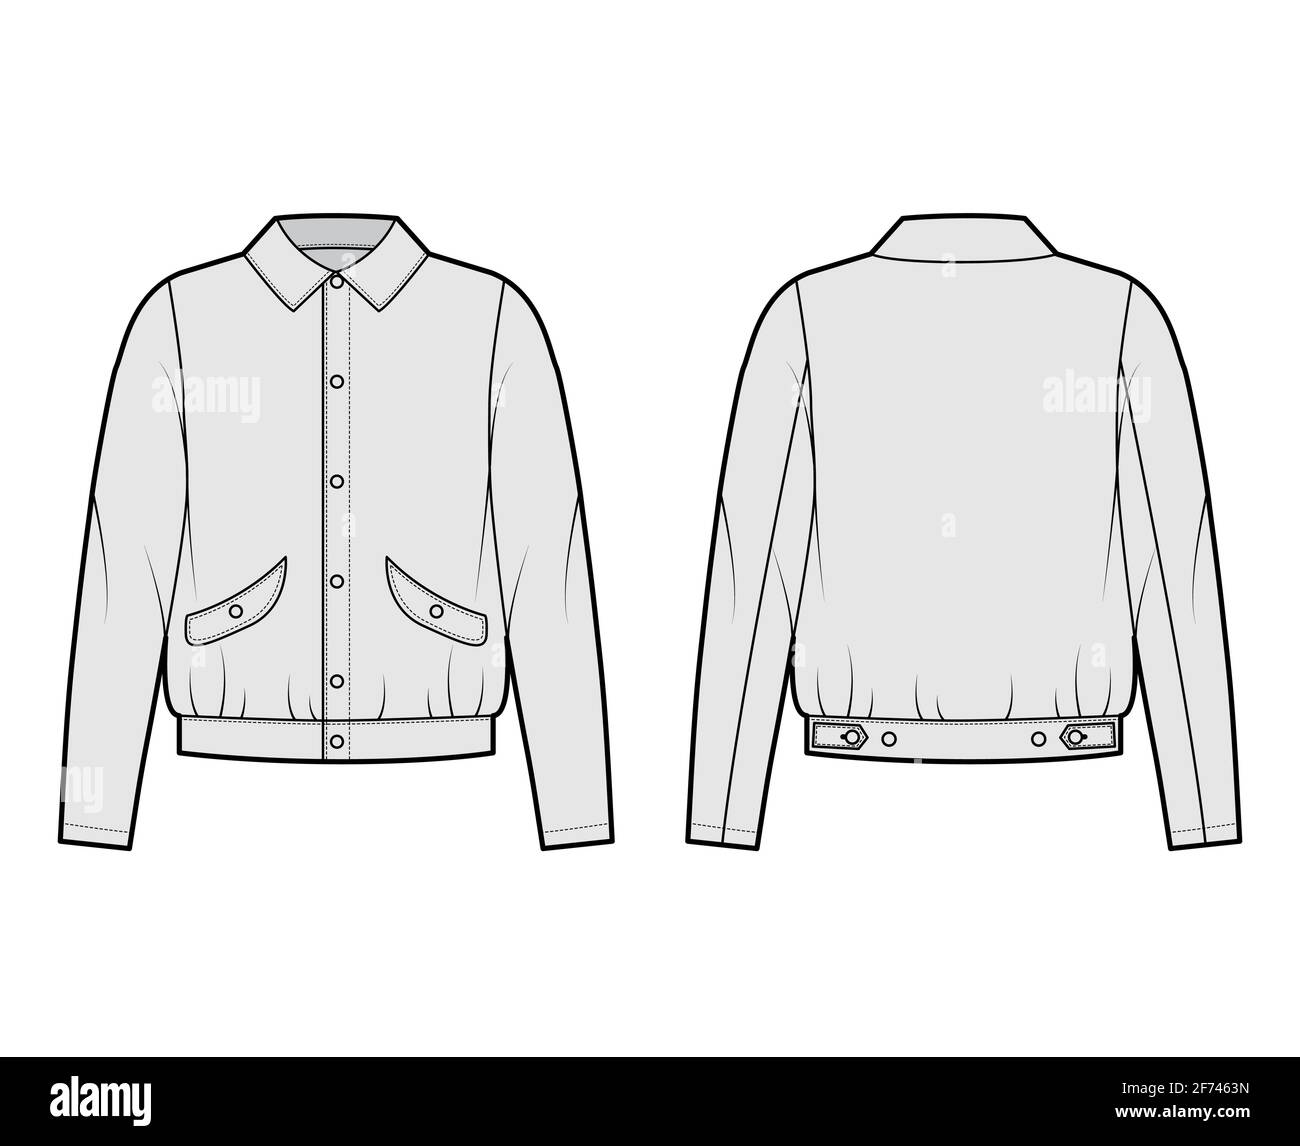 Blouson jacket technical fashion illustration with classic collar, oversized, long sleeves, flap pockets, snap buttons fastening. Flat coat template front, back, grey color. Women men top CAD mockup Stock Vector